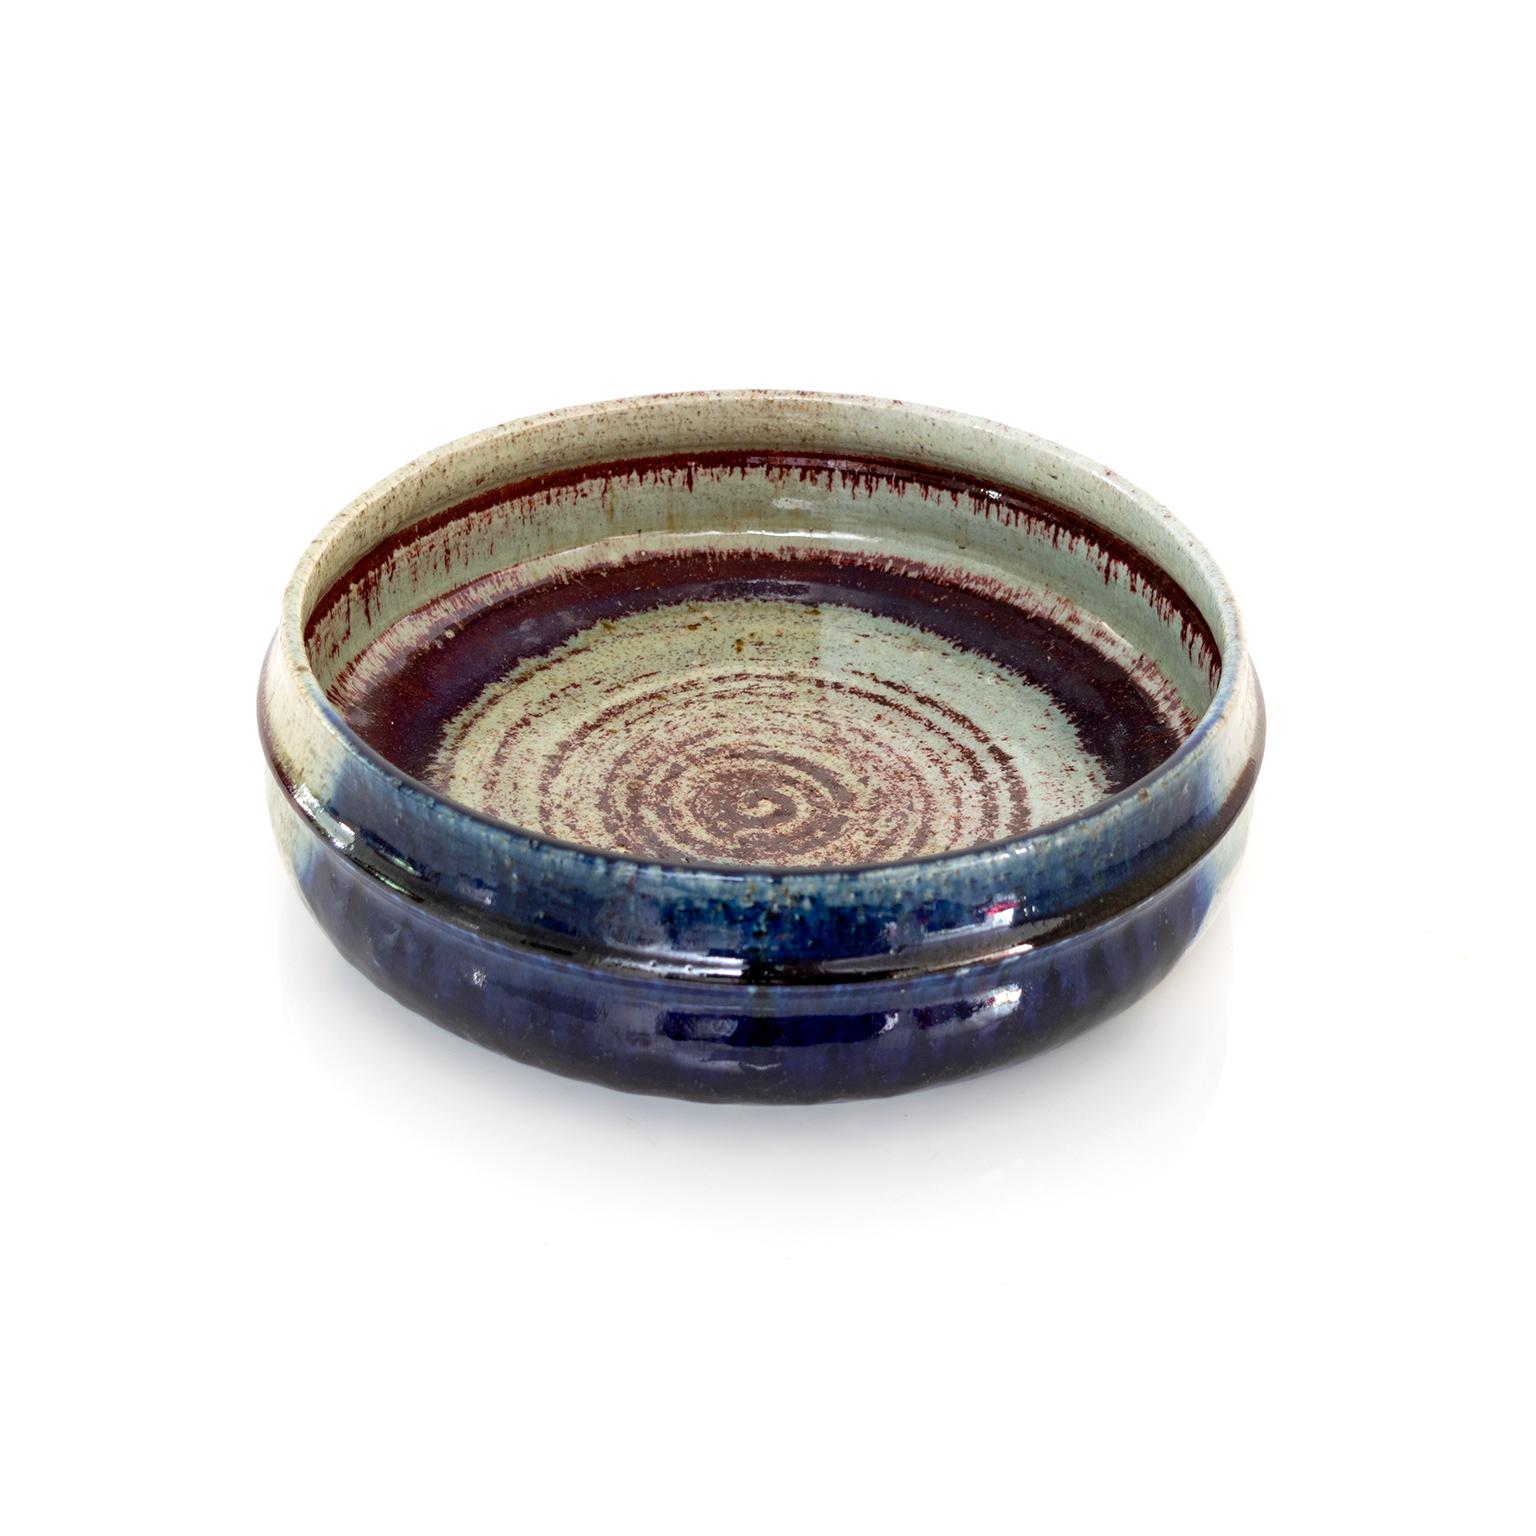 A large Rorstrand Studio ceramic bowl by Sylvia Leuchovious. This unique hand thrown bowl is glazed in deep blue and red against a lighter neutral base glaze. 

Measures: Diameter: 12